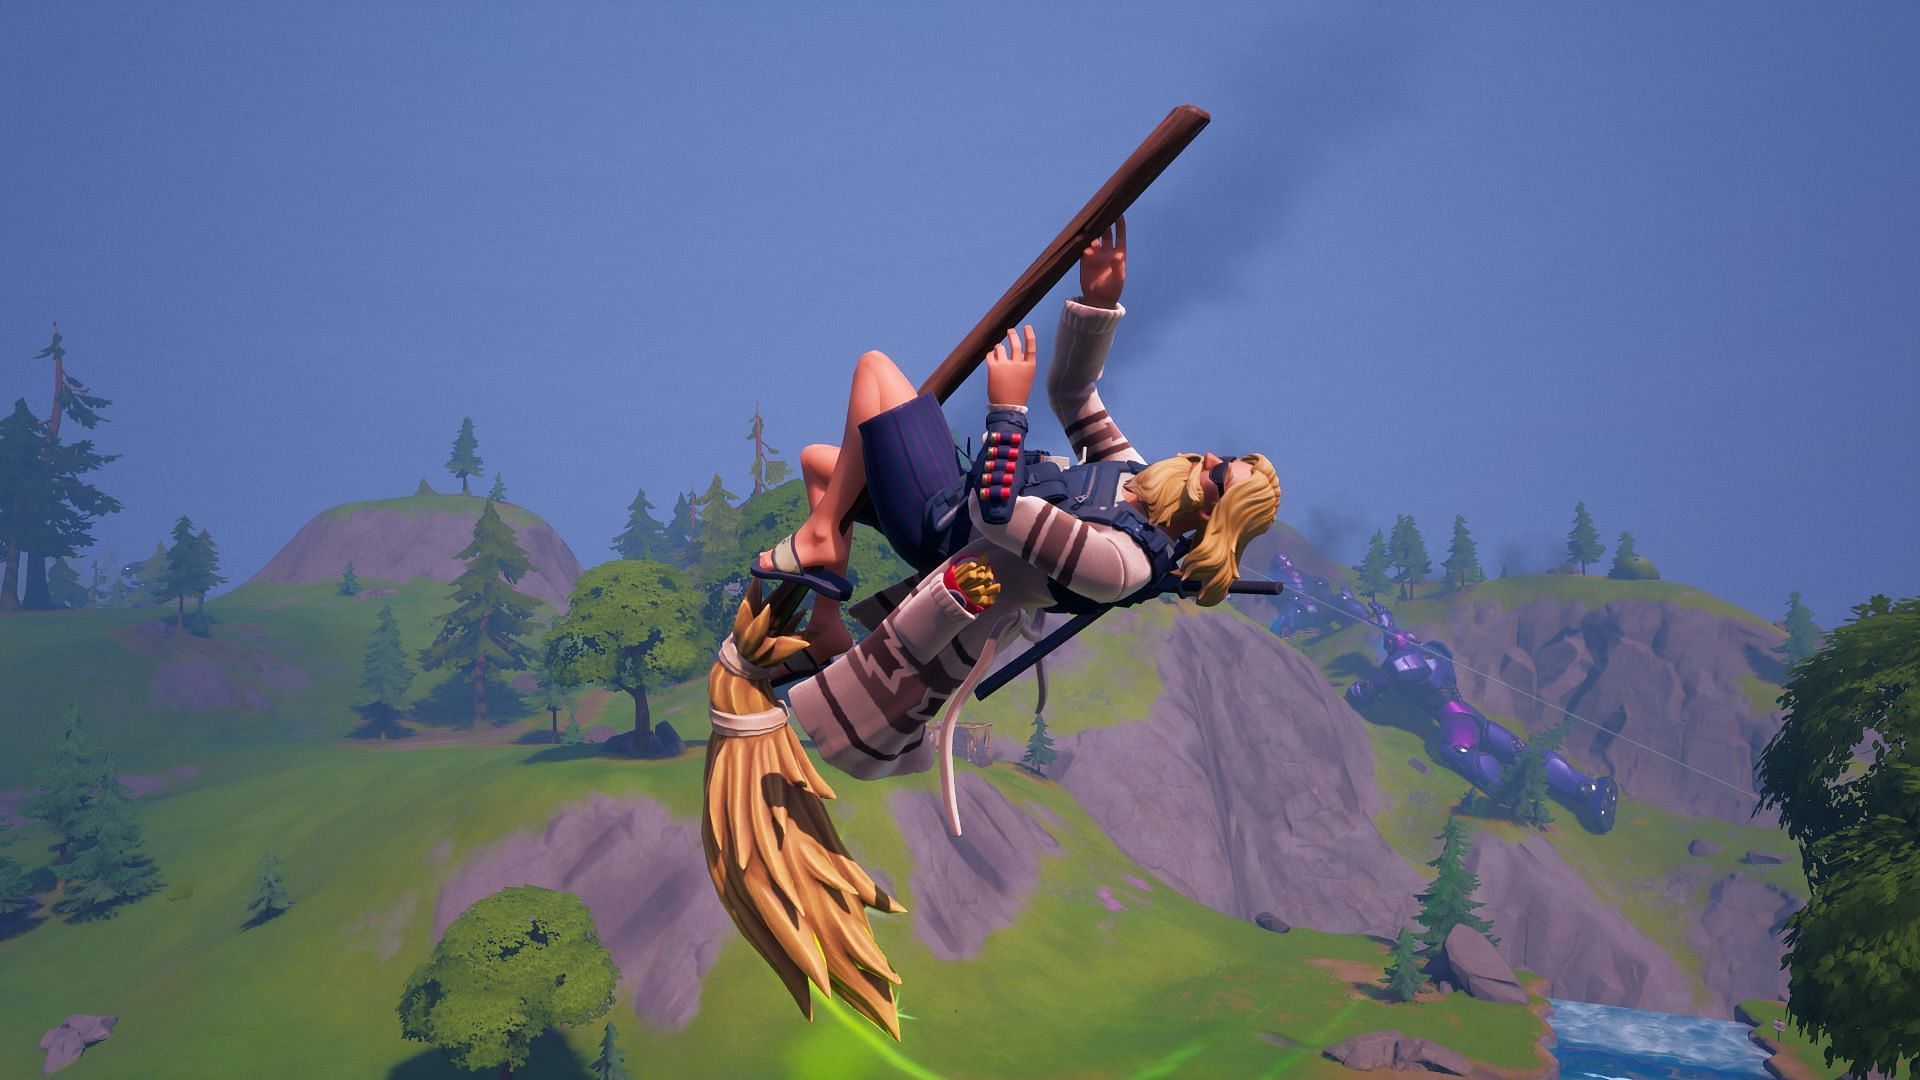 The witch's broom is a popular mythical item that appears during Halloween events (Image via Epic Games)